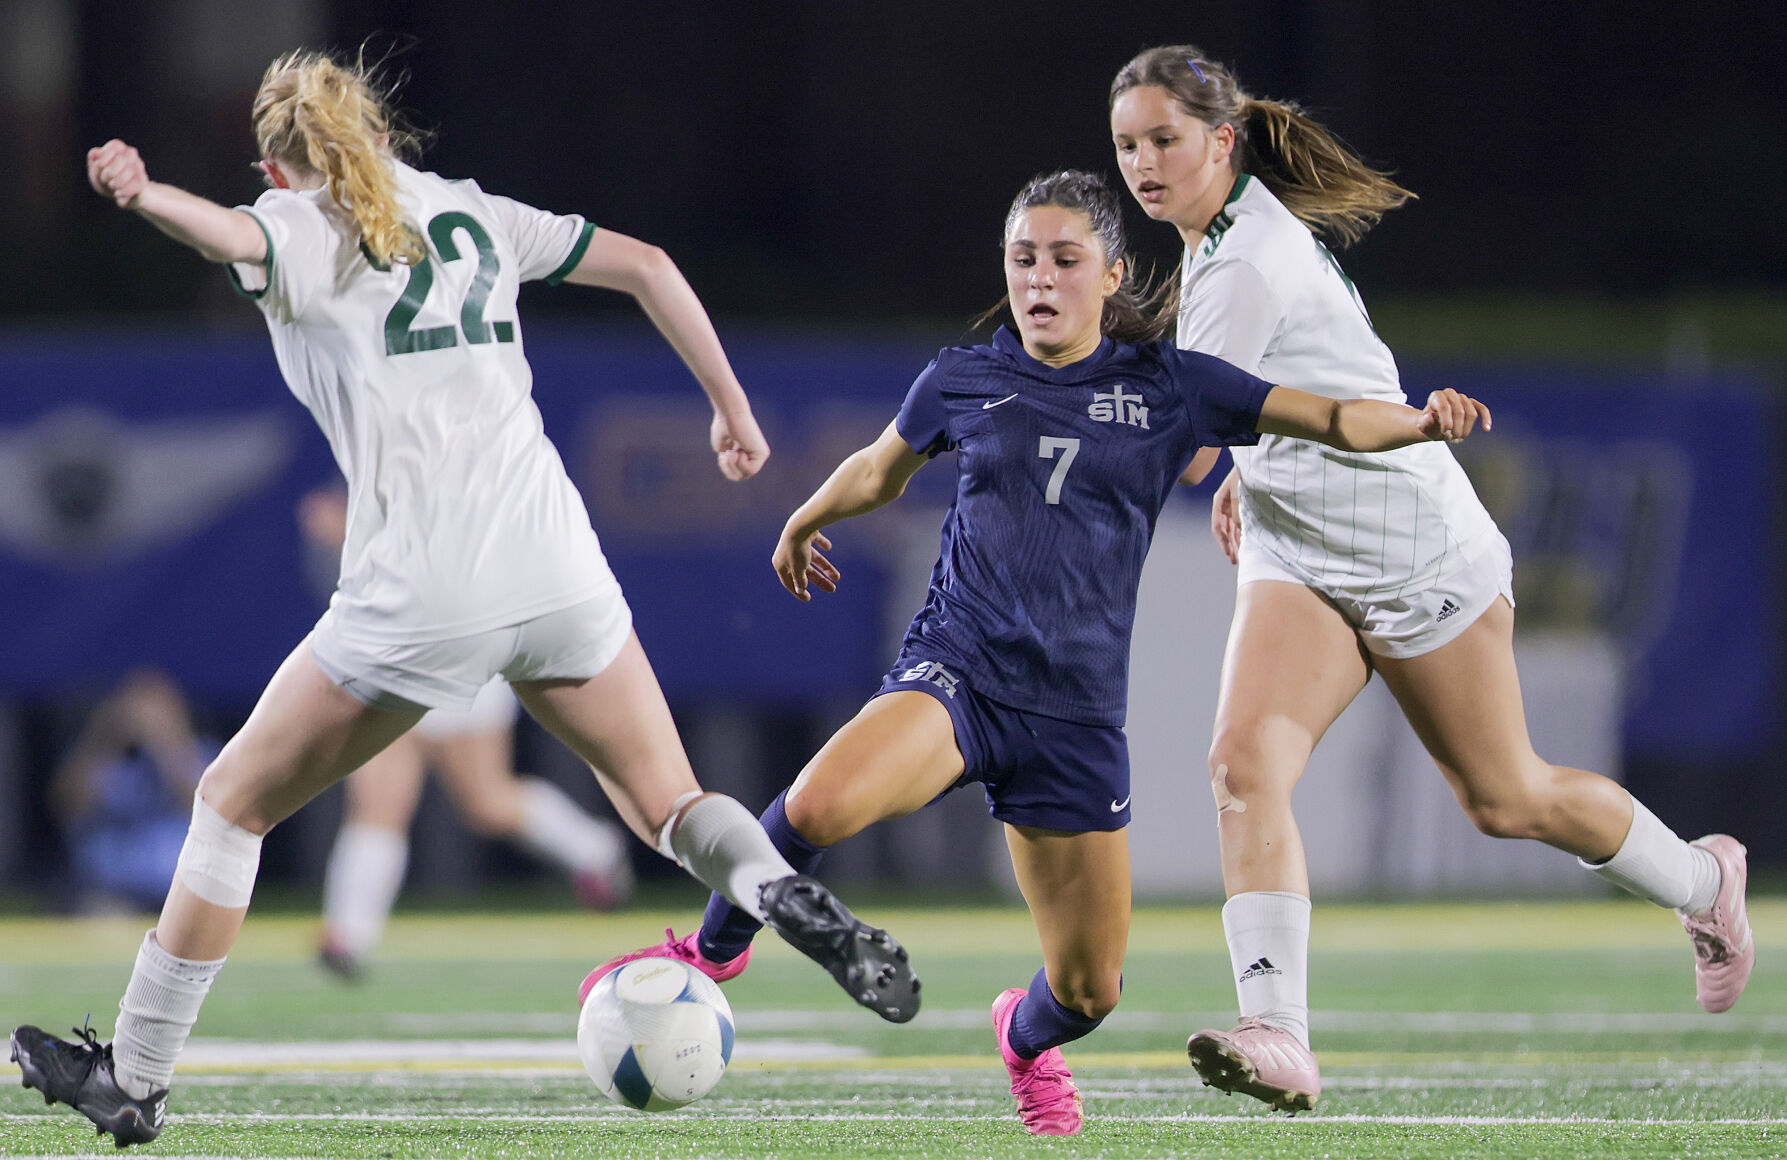 St. Thomas More Dominates Ben Franklin Girls 6-1 in Division II Soccer State Final